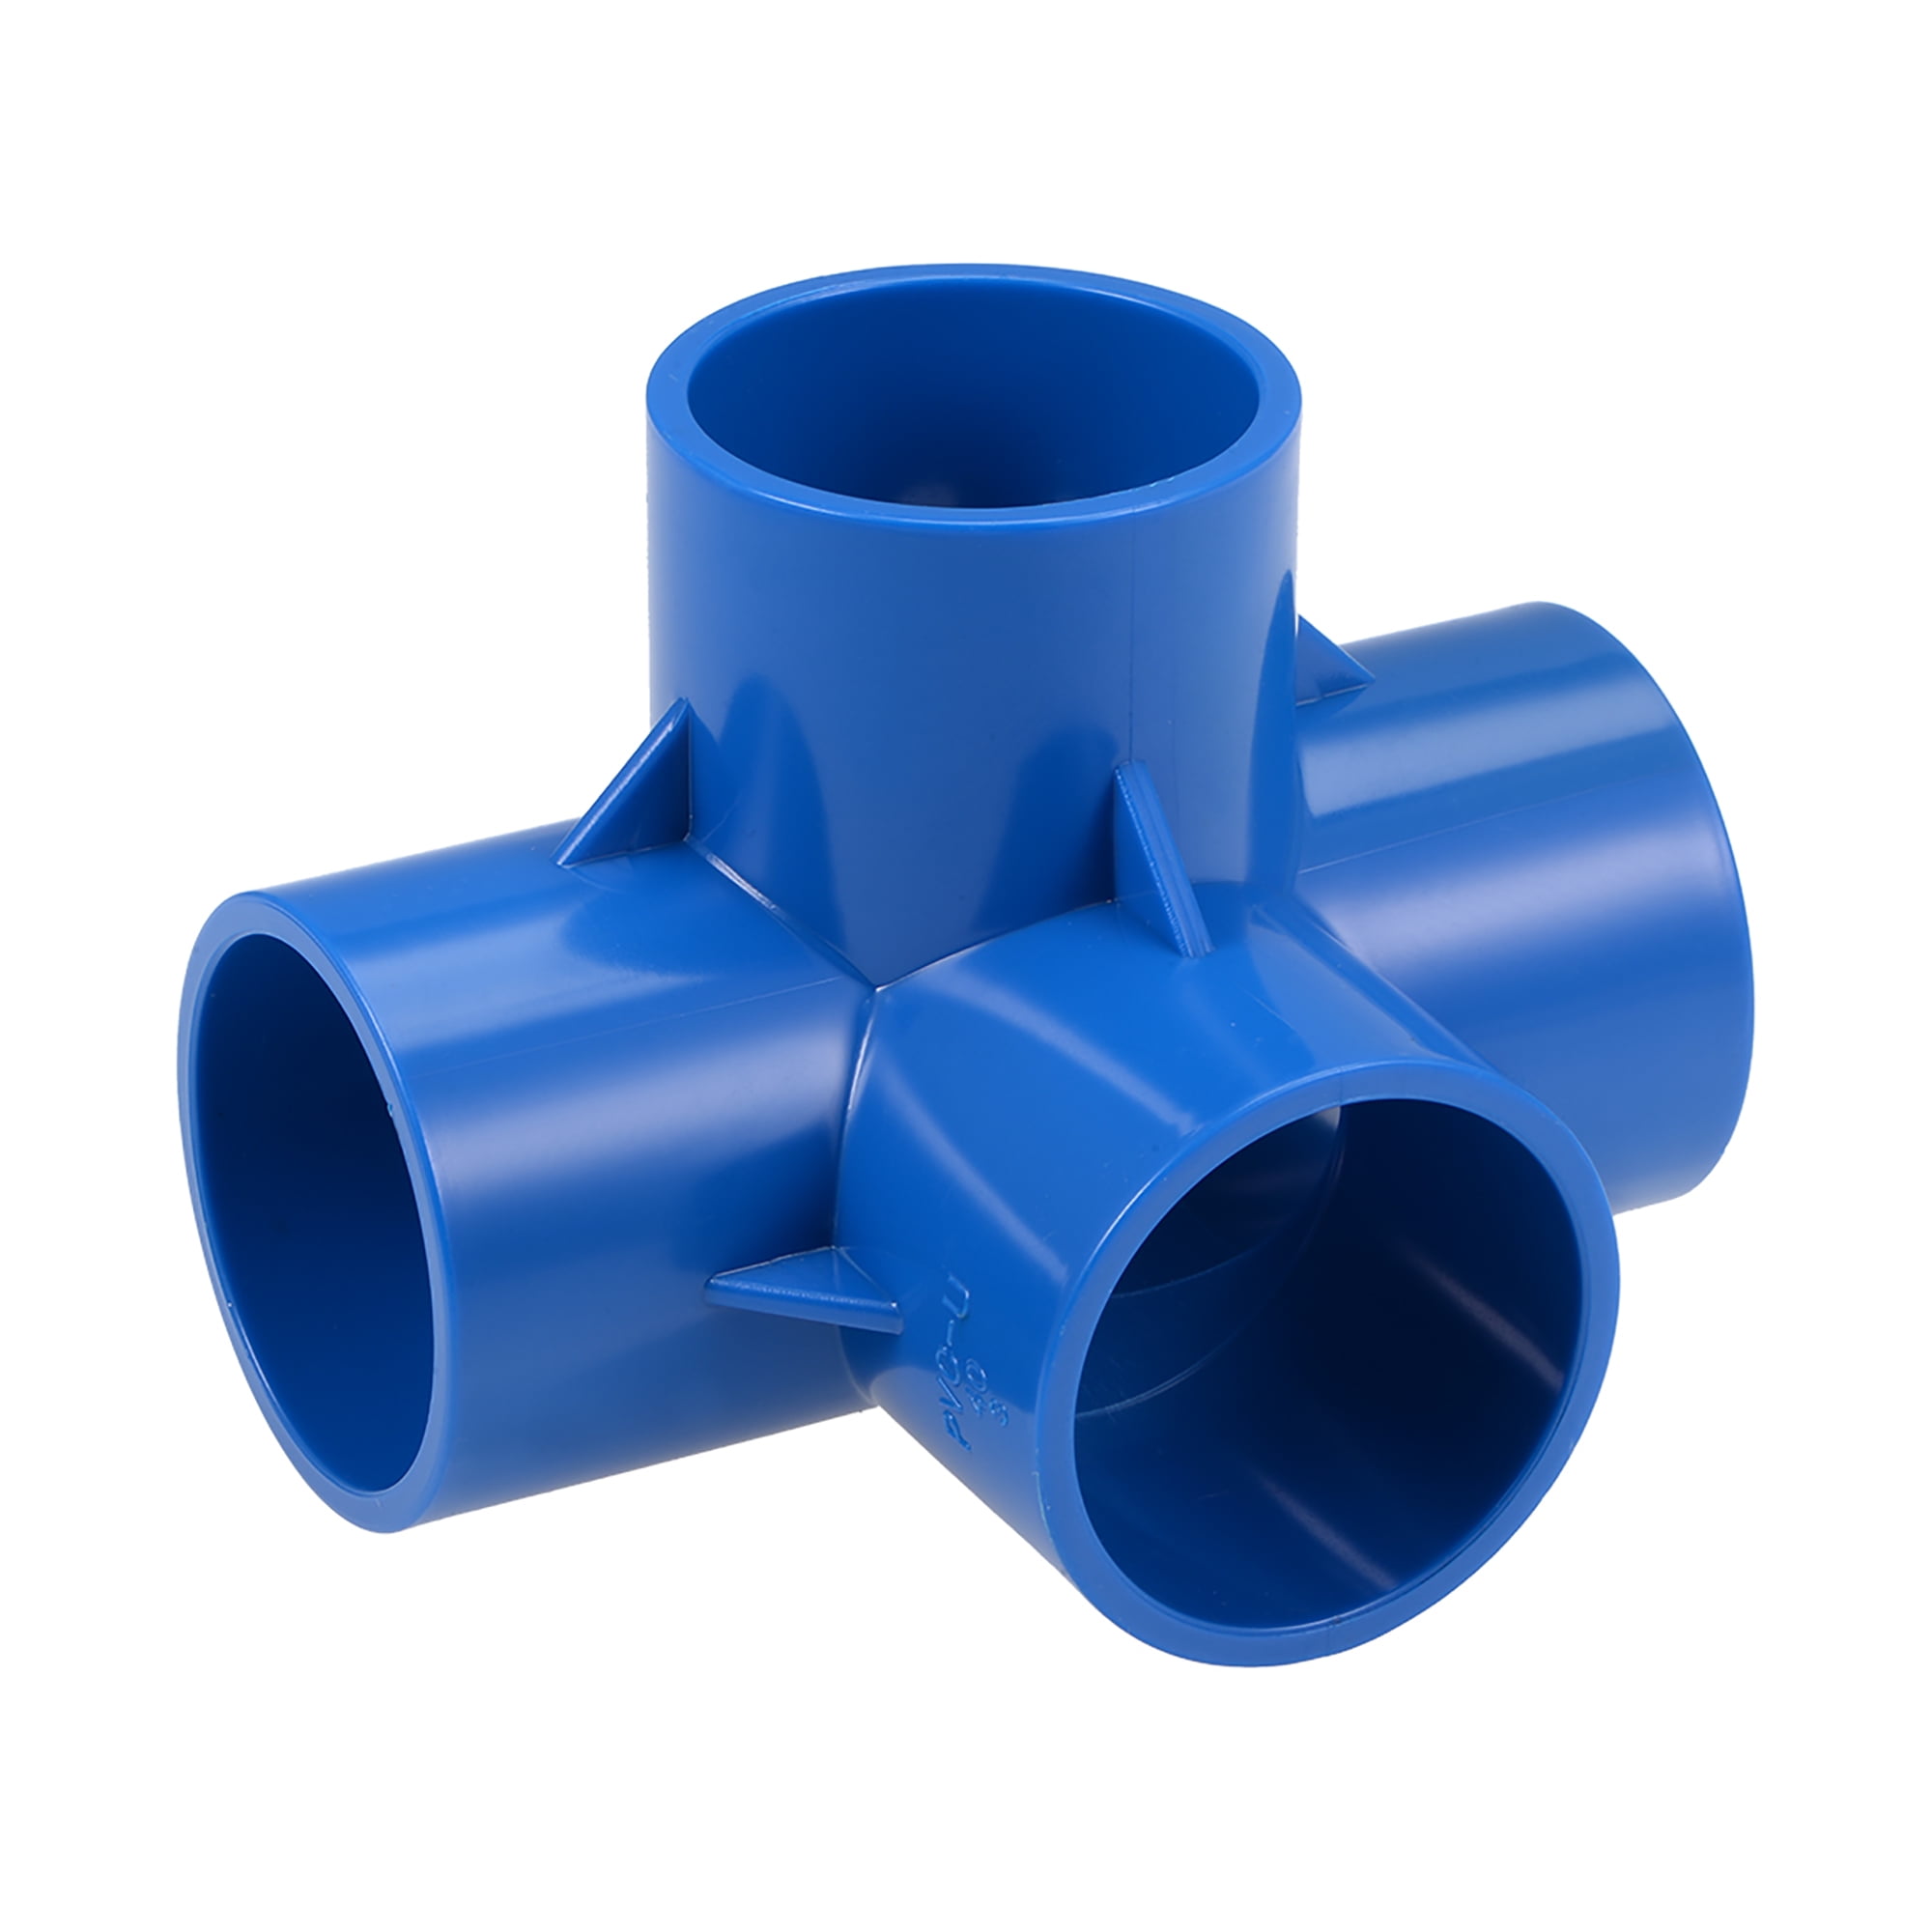 8 Inch Pvc Tee : 4-Way Elbow PVC Pipe Fitting,Furniture Grade,1-1/2-inch ... - The 60 inch assembly that has the 1/2 inch tee should be placed on the bottom of your water tunnel as this will be attached to your garden hose.